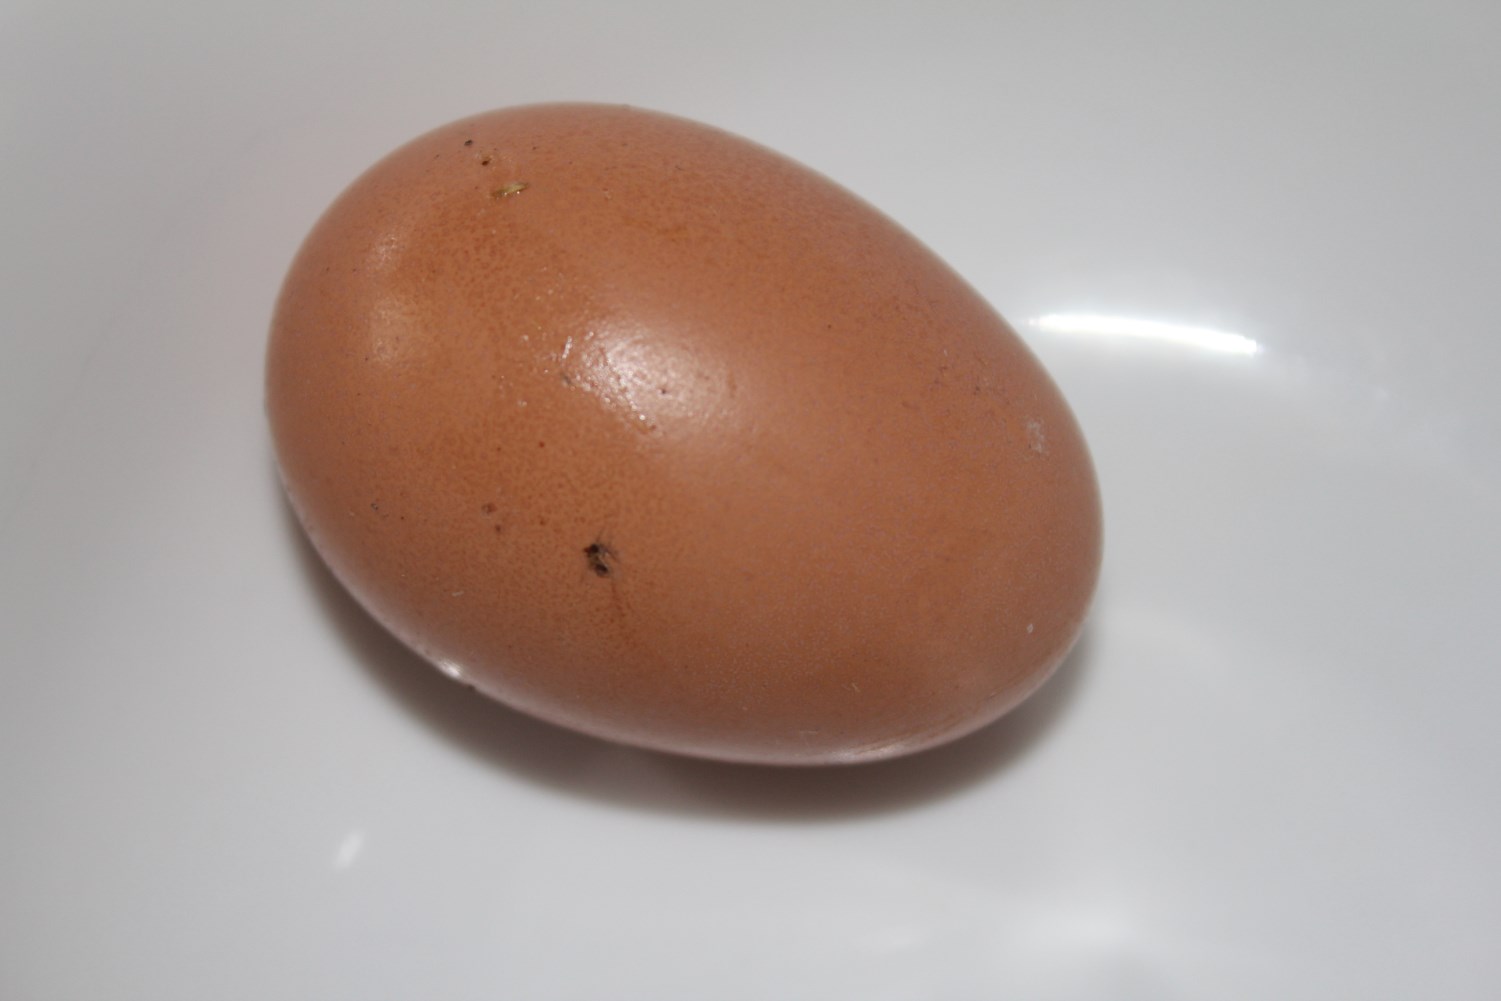 My very first egg laid today, 8/13/13, from my original backyard flock hatched in March, 2013!